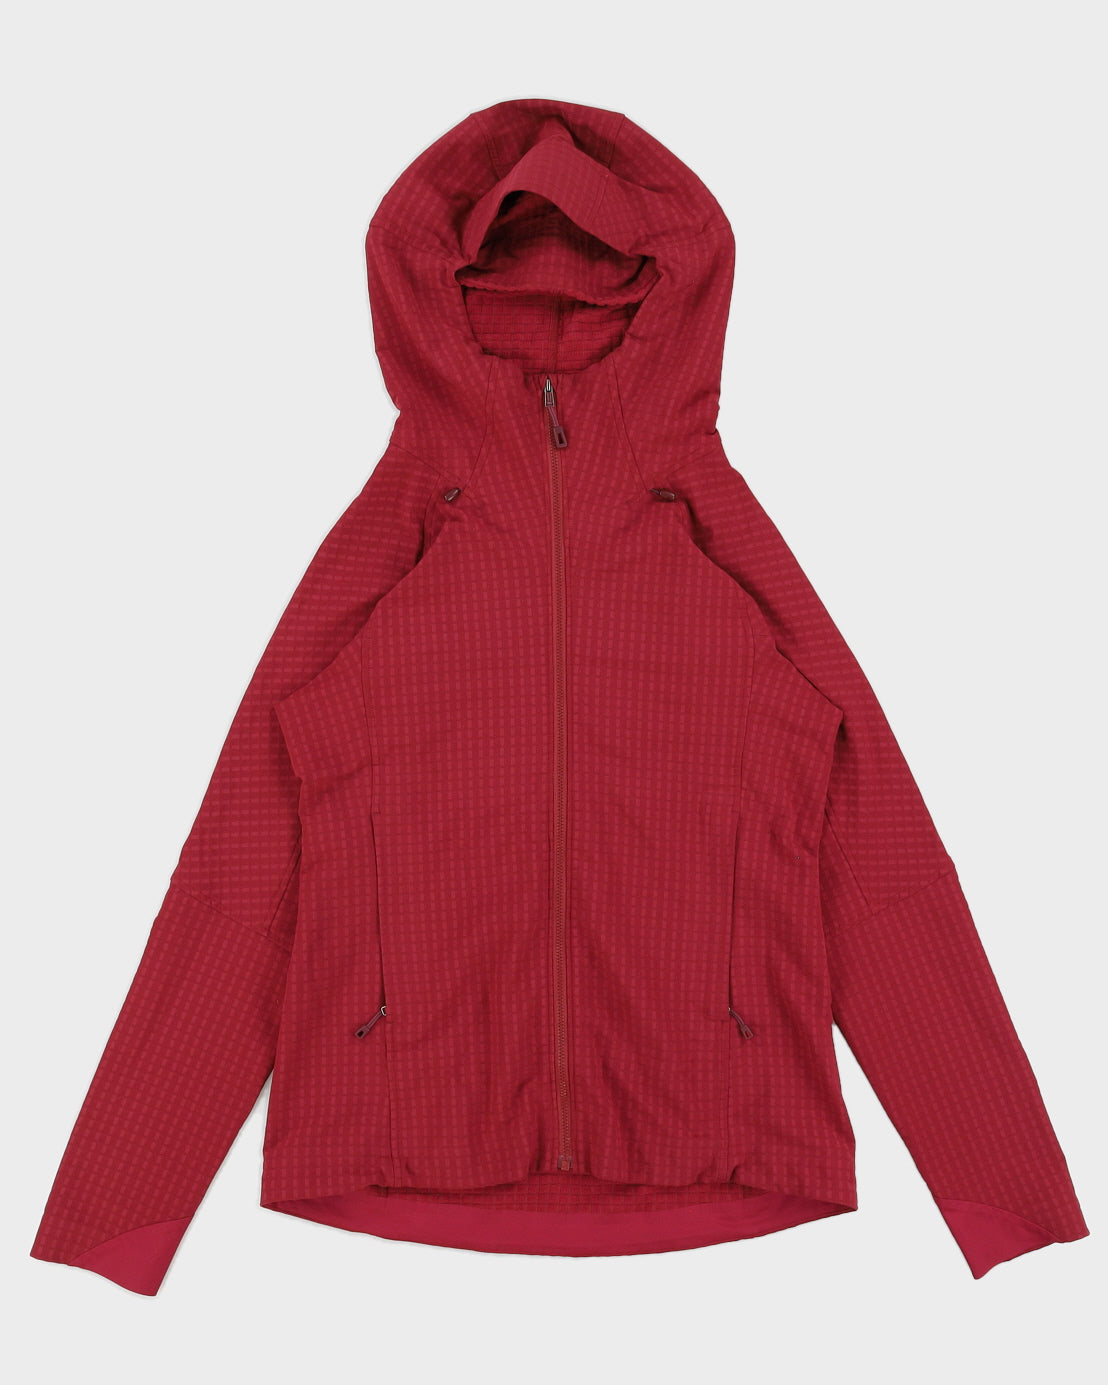 Patagonia Maroon Fitted Zip Up Hooded Jacket - S